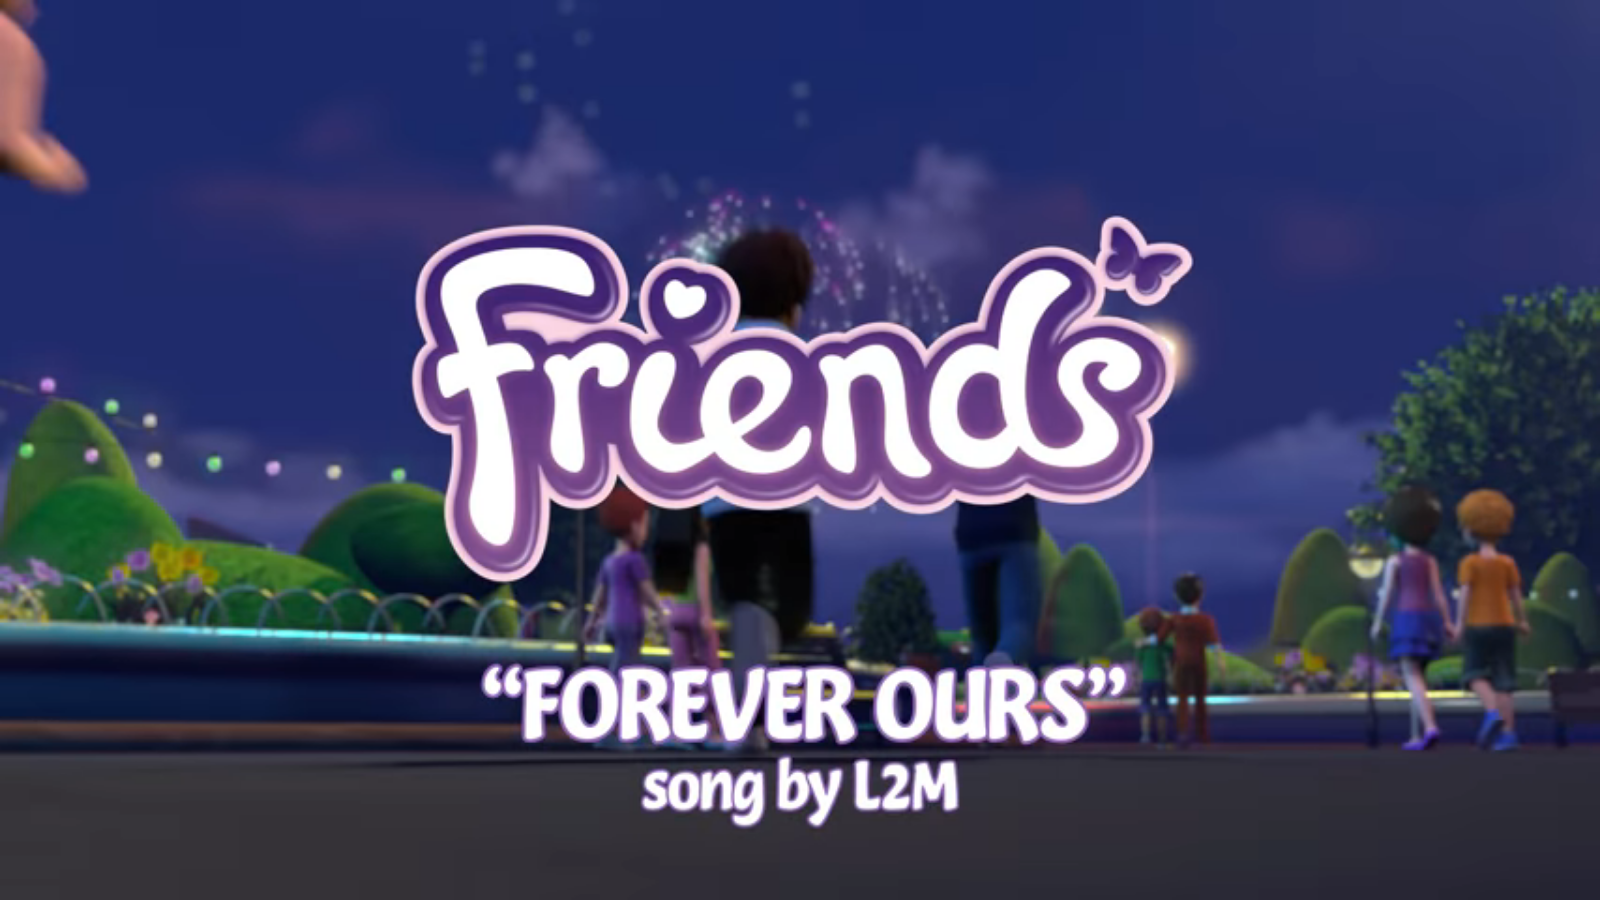 Lego friends song